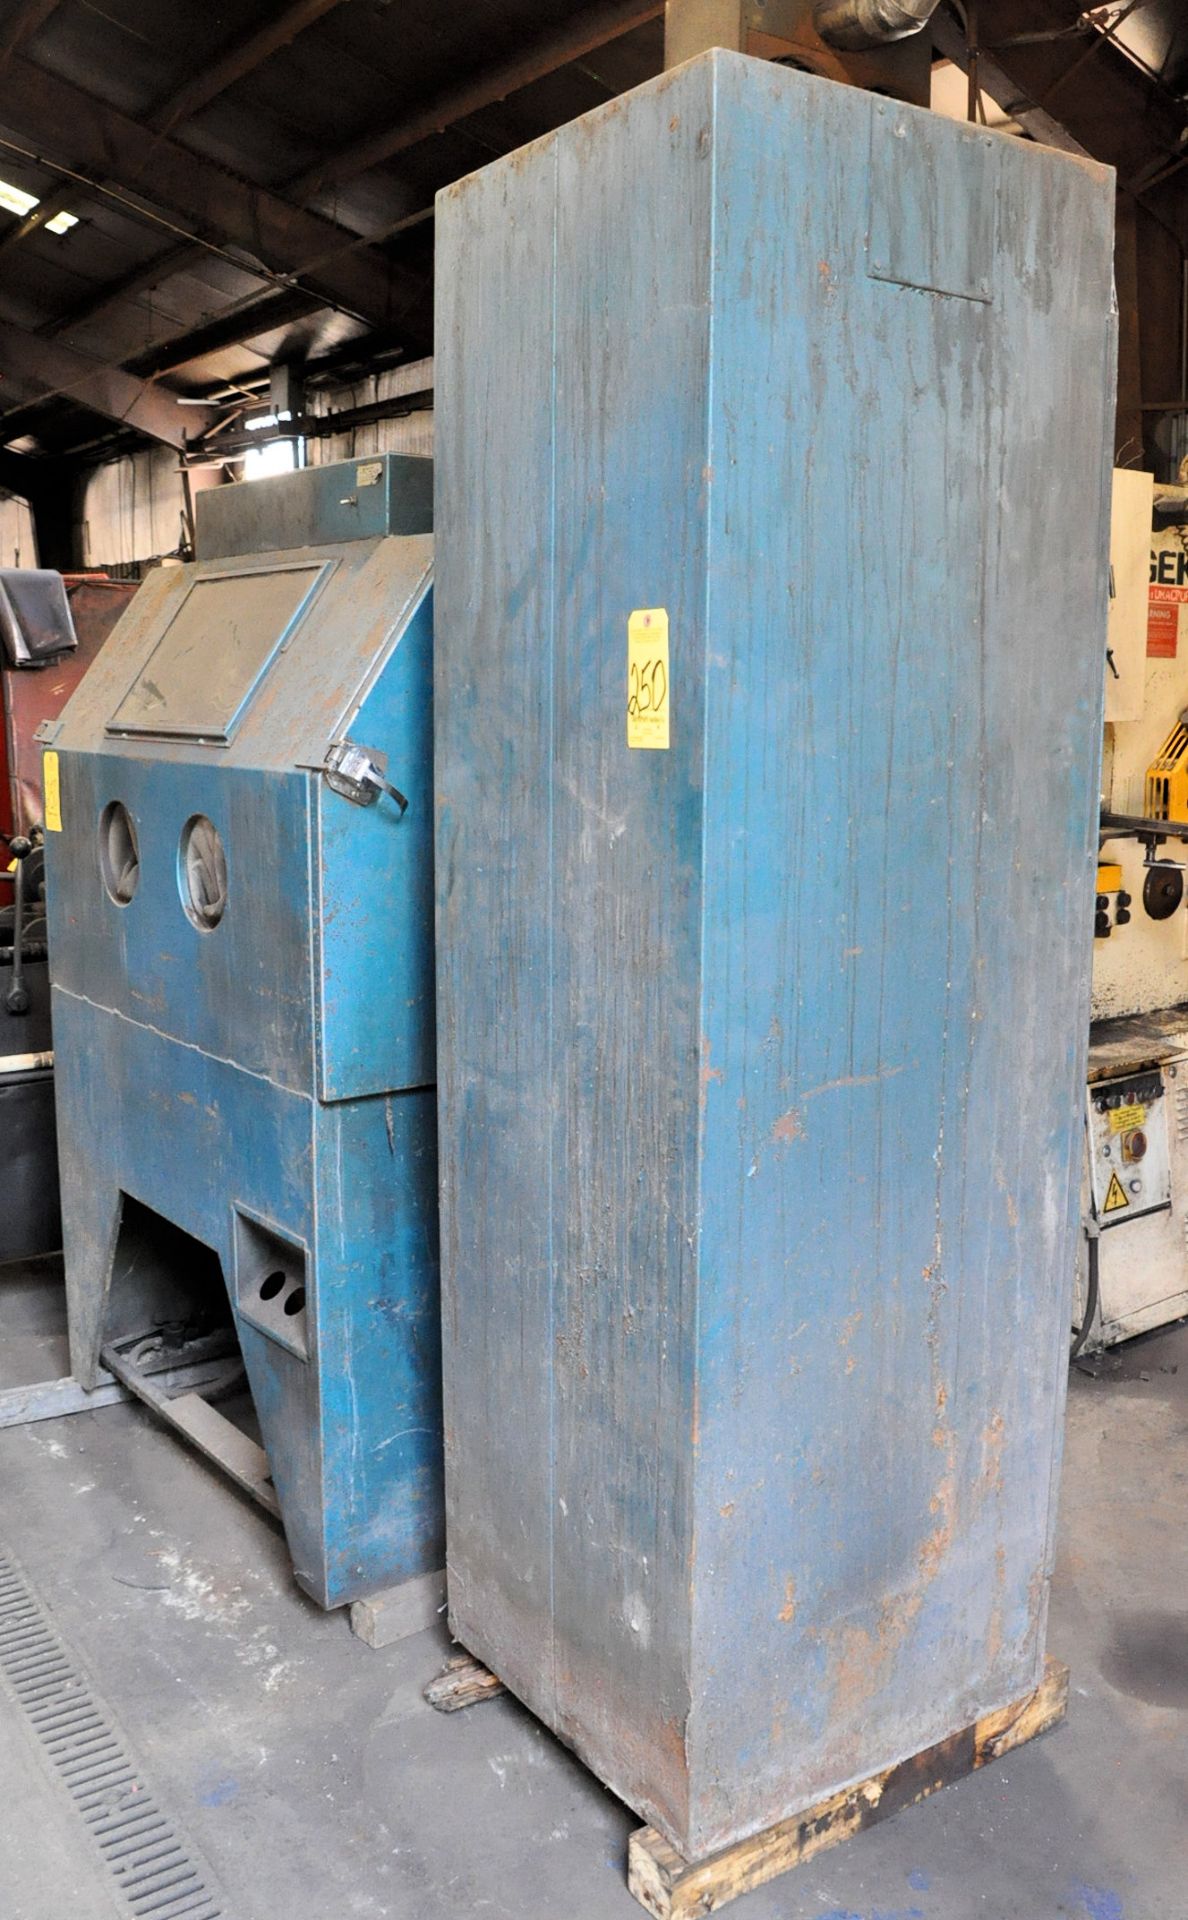 No Identifying Name 2-Hole Dry Shot Blast Cabinet, 42" x 24" Cabinet, with Collector - Image 2 of 3